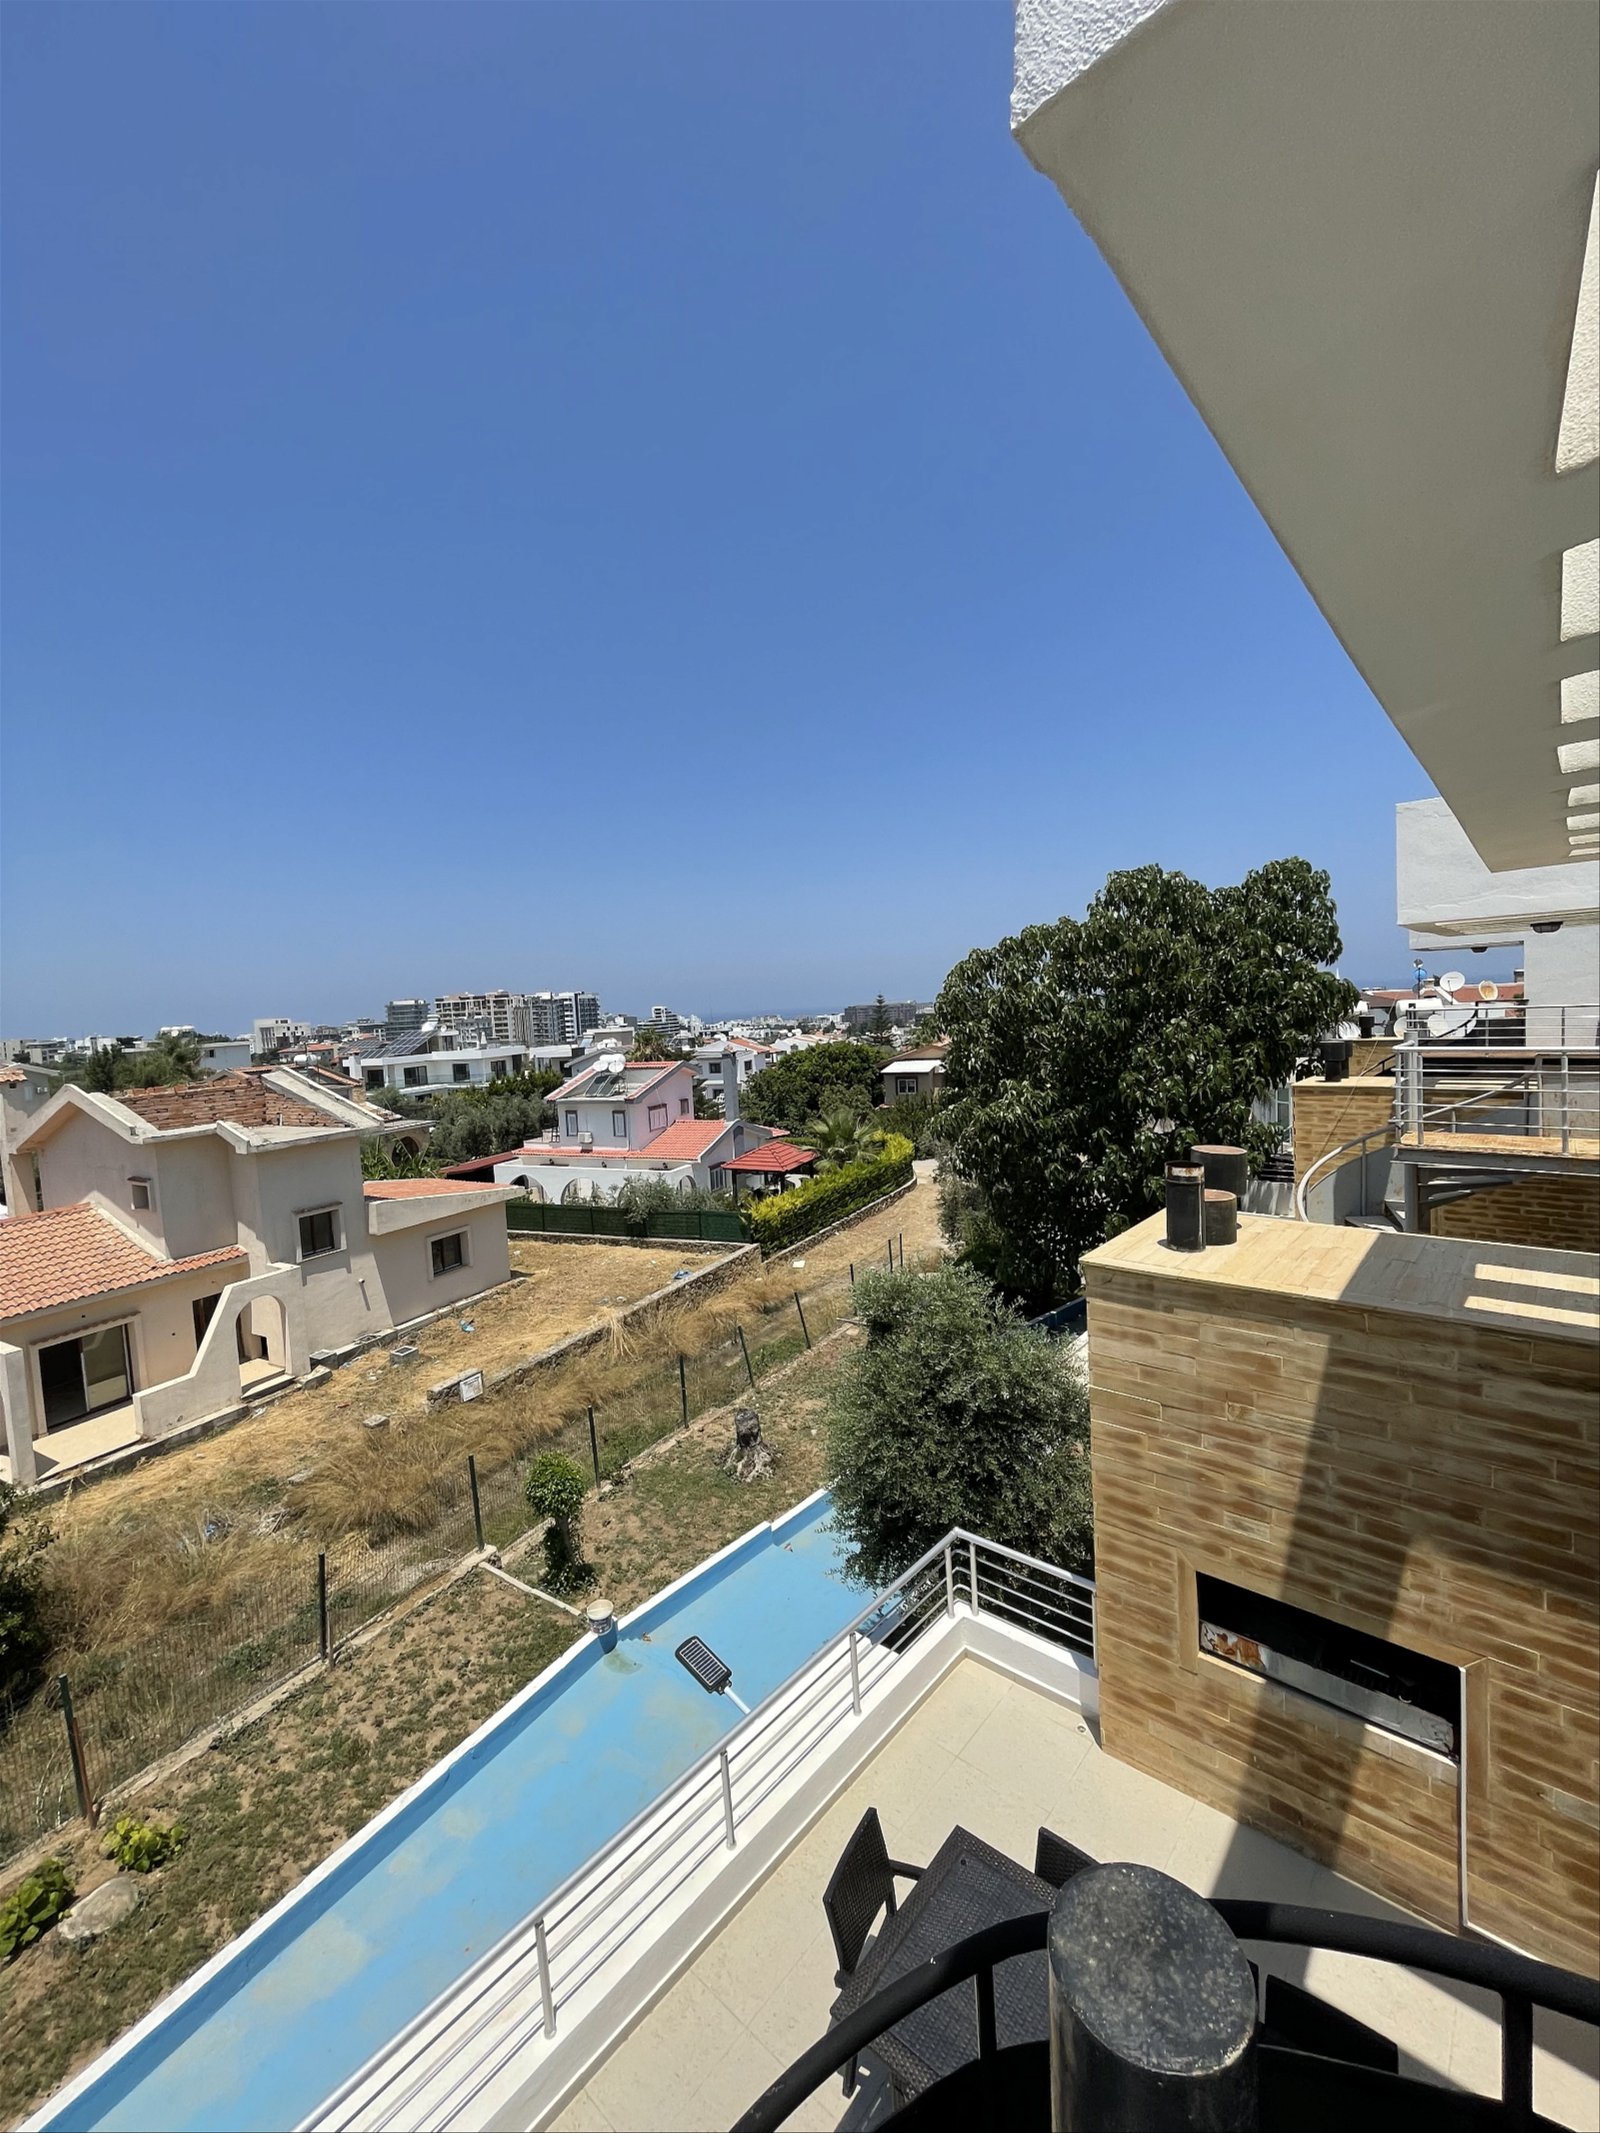 Modern 2-Bed Duplex with Jacuzzi, Communal Pool, and Gym in Lotus 10, Dogankoy-89a5012c-e3ee-4f8b-b3ce-8ff6e279722c